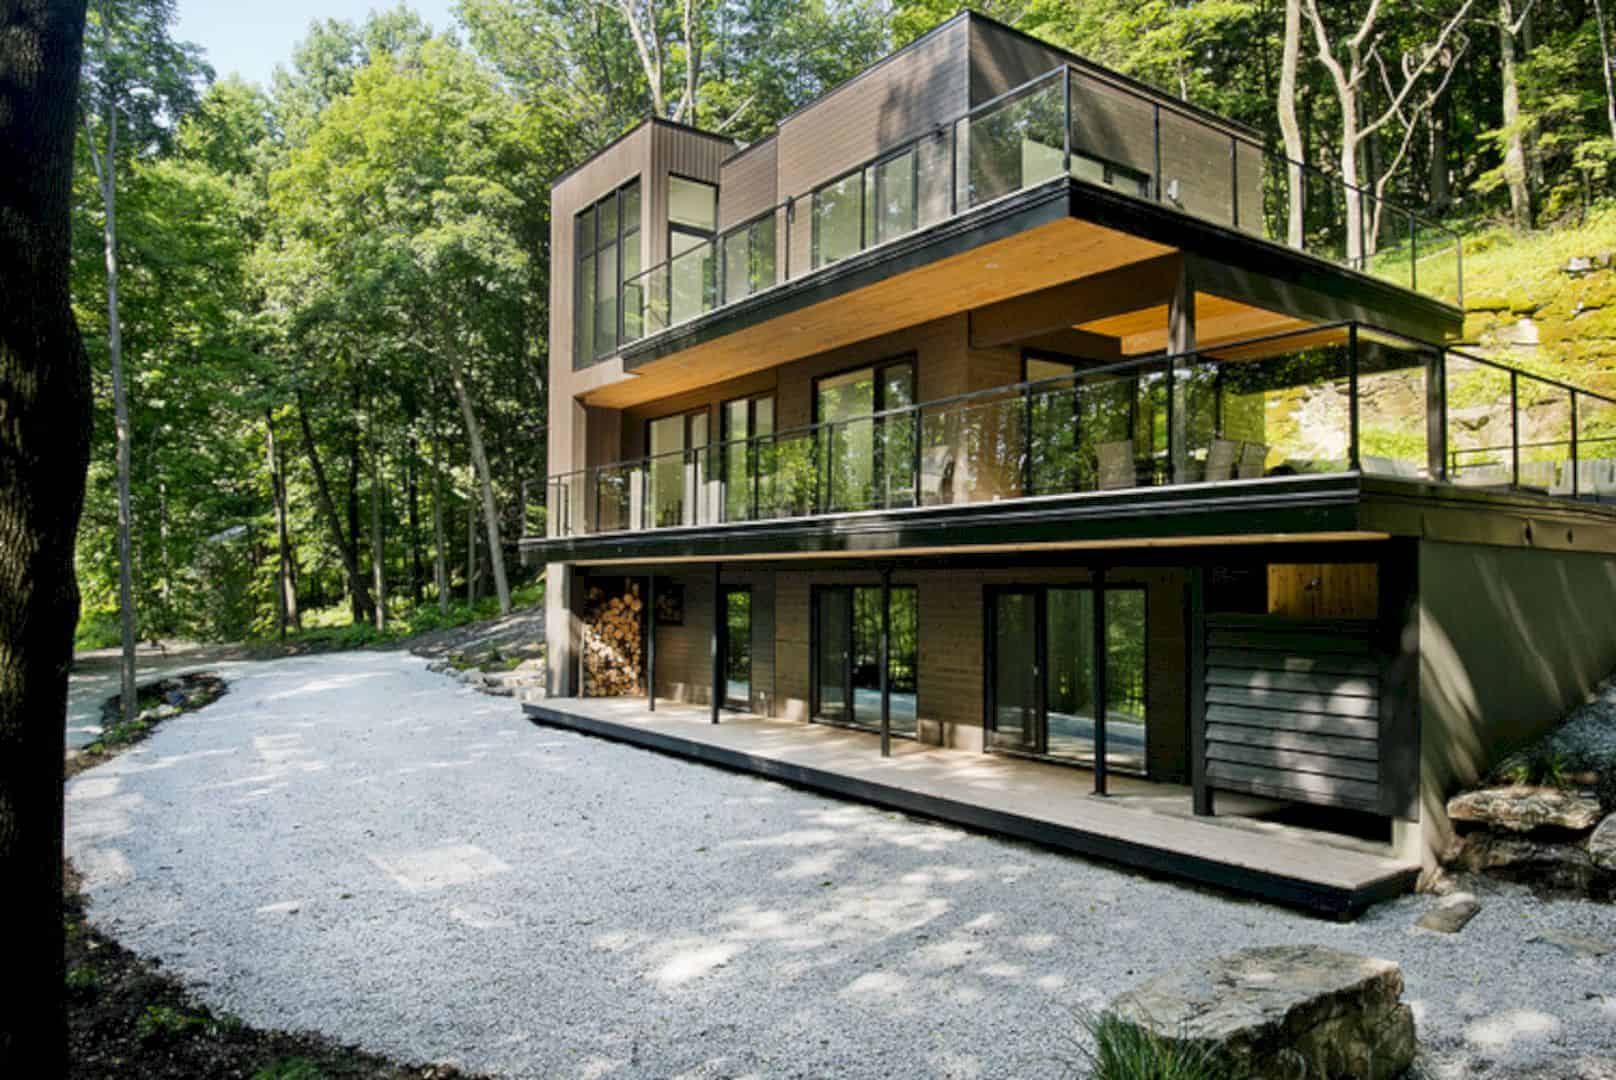 Chalet Lac Champlain A Contemporary Cottage Acting As Observation Post On Natural Settings 10